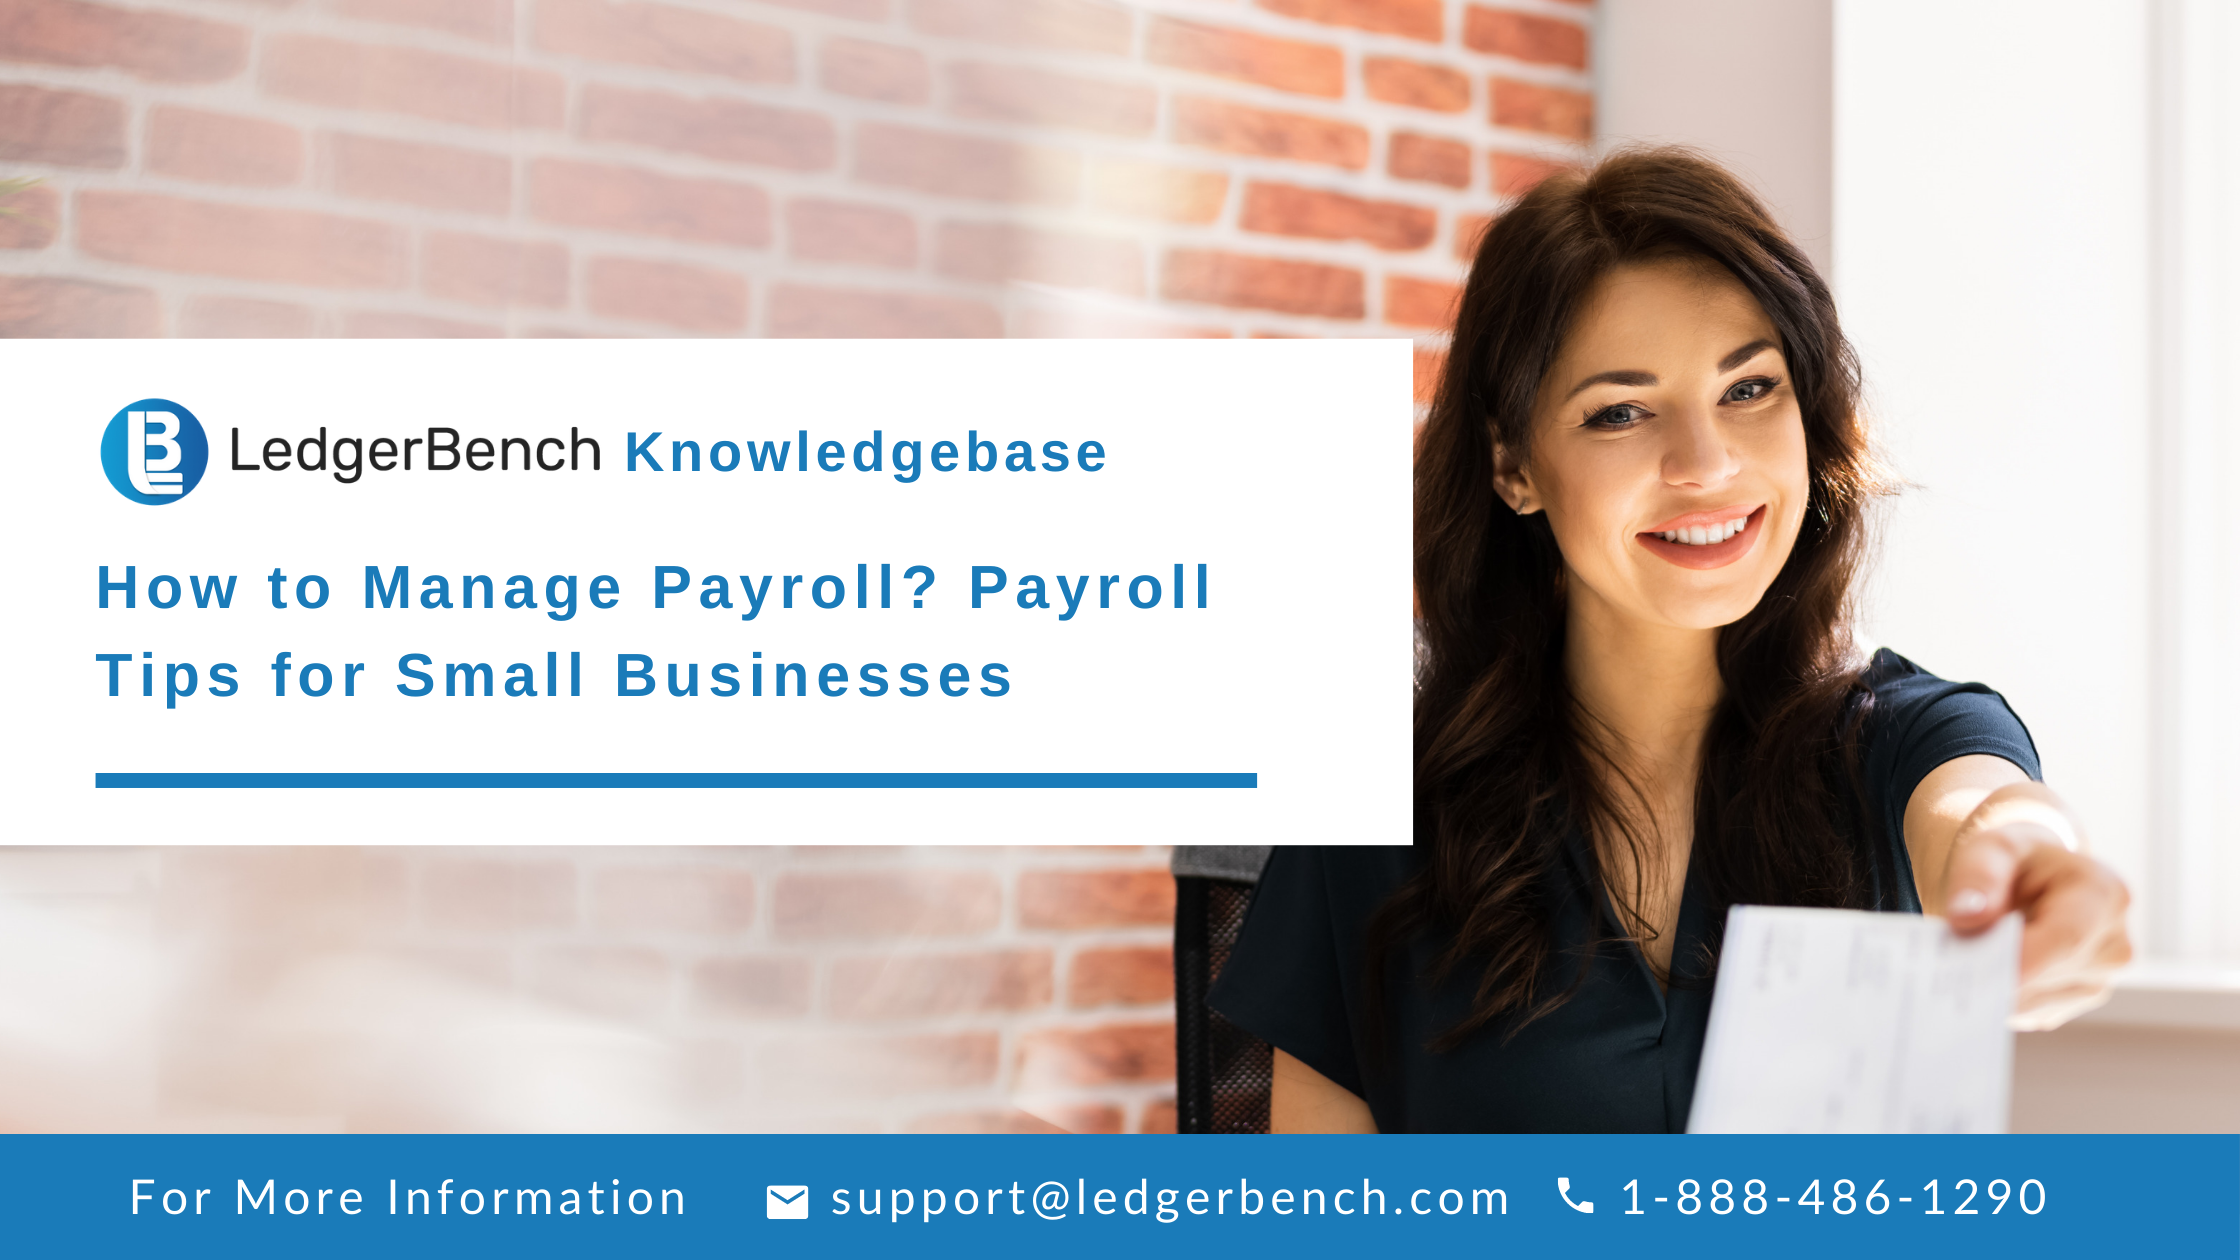 How to Manage Payroll? Payroll Tips for Small Businesses